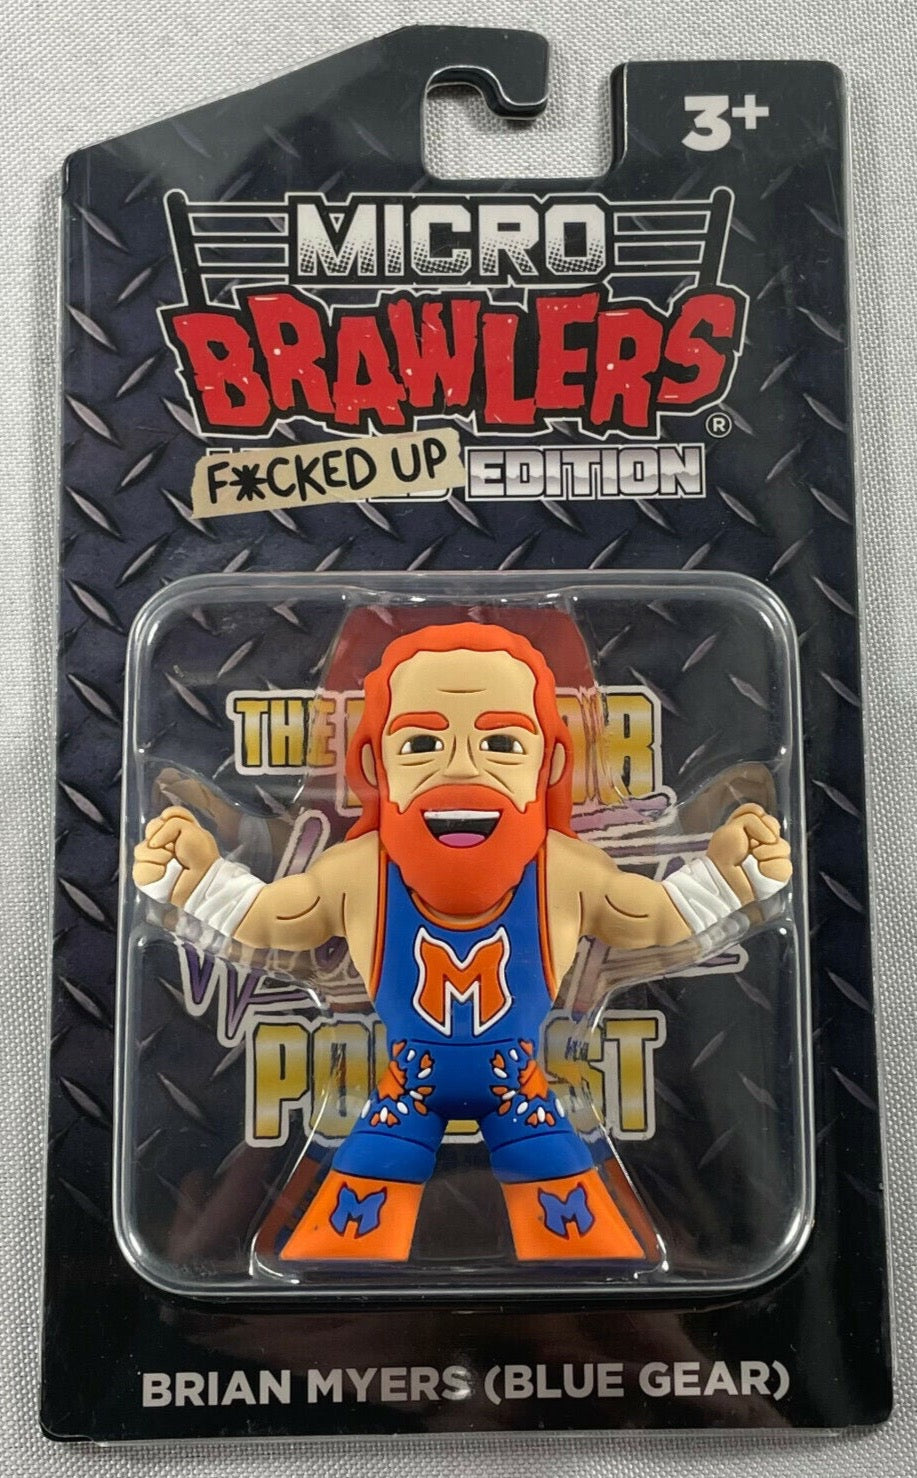 2021 Major Wrestling Figure Podcast Micro Brawlers F*cked Up Edition Brian Myers [Blue Gear]